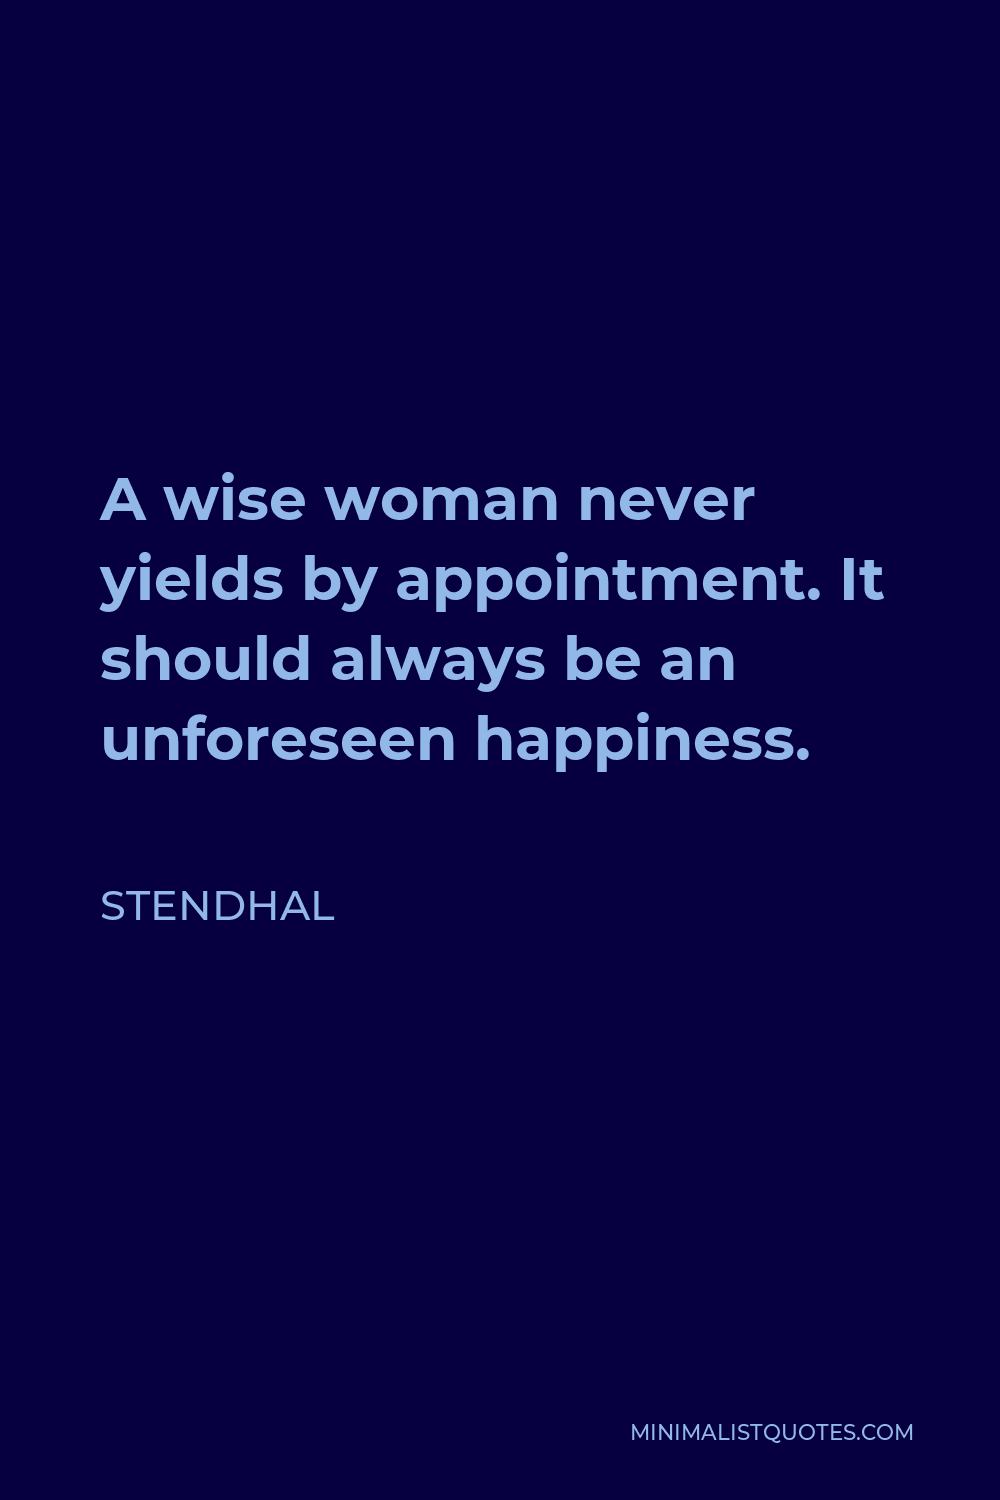 Stendhal Quote - A wise woman never yields by appointment. It should always be an unforeseen happiness.